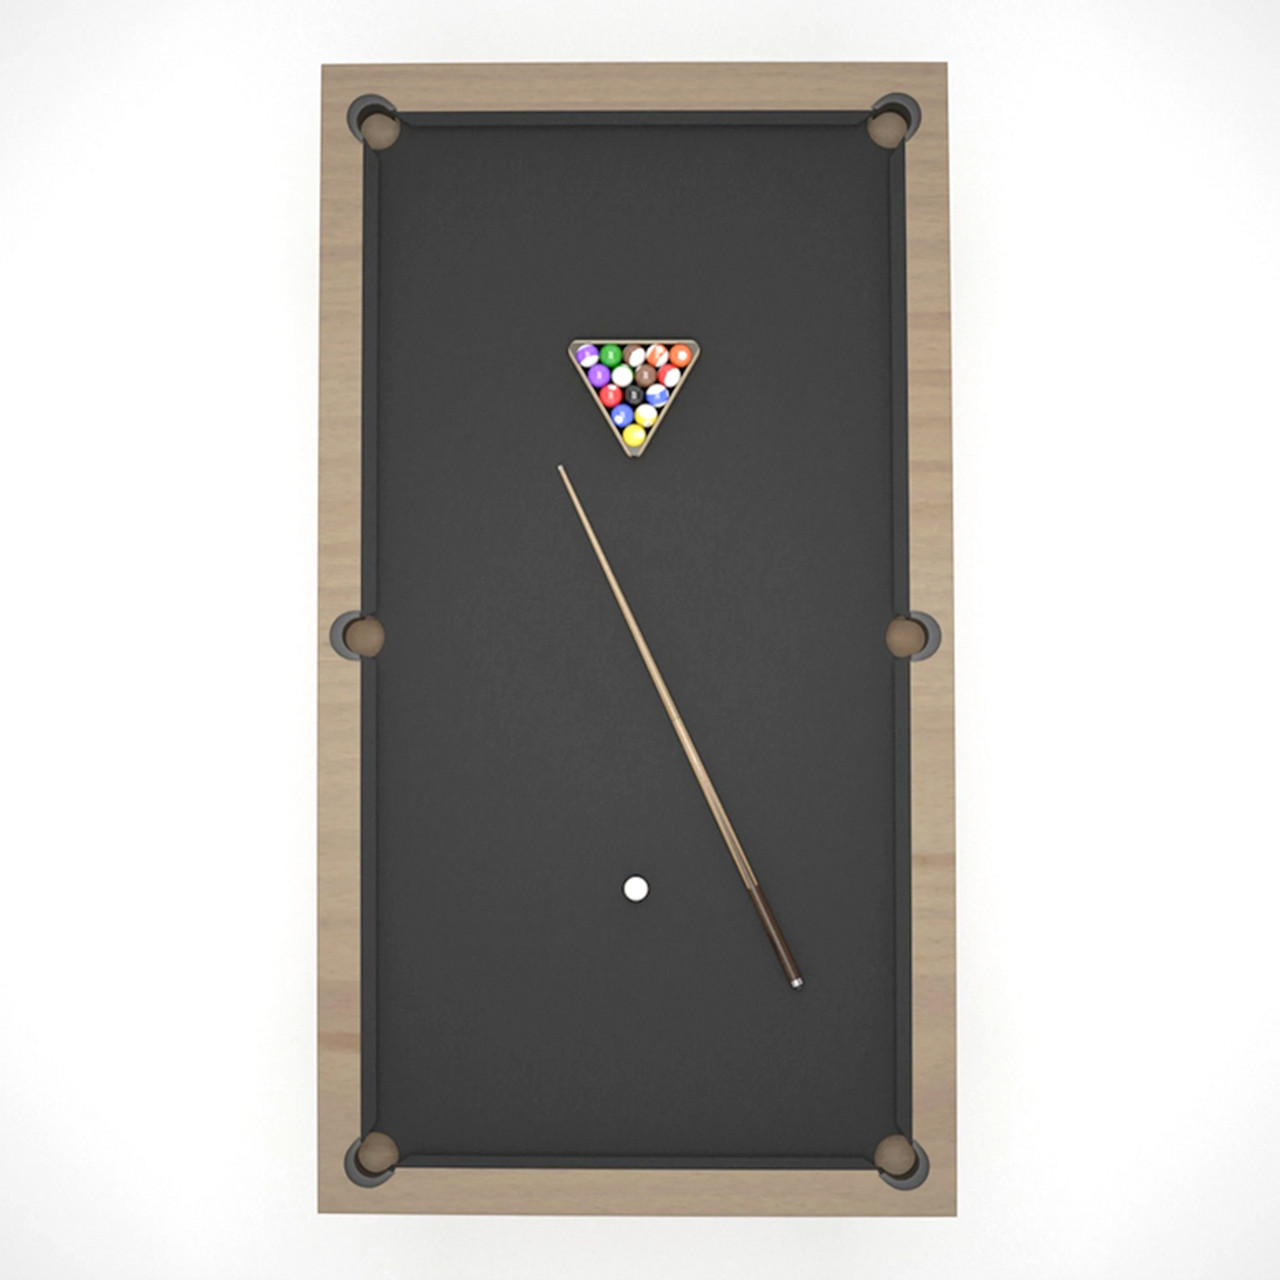 The Fortress Wooden Luxury Pool Table